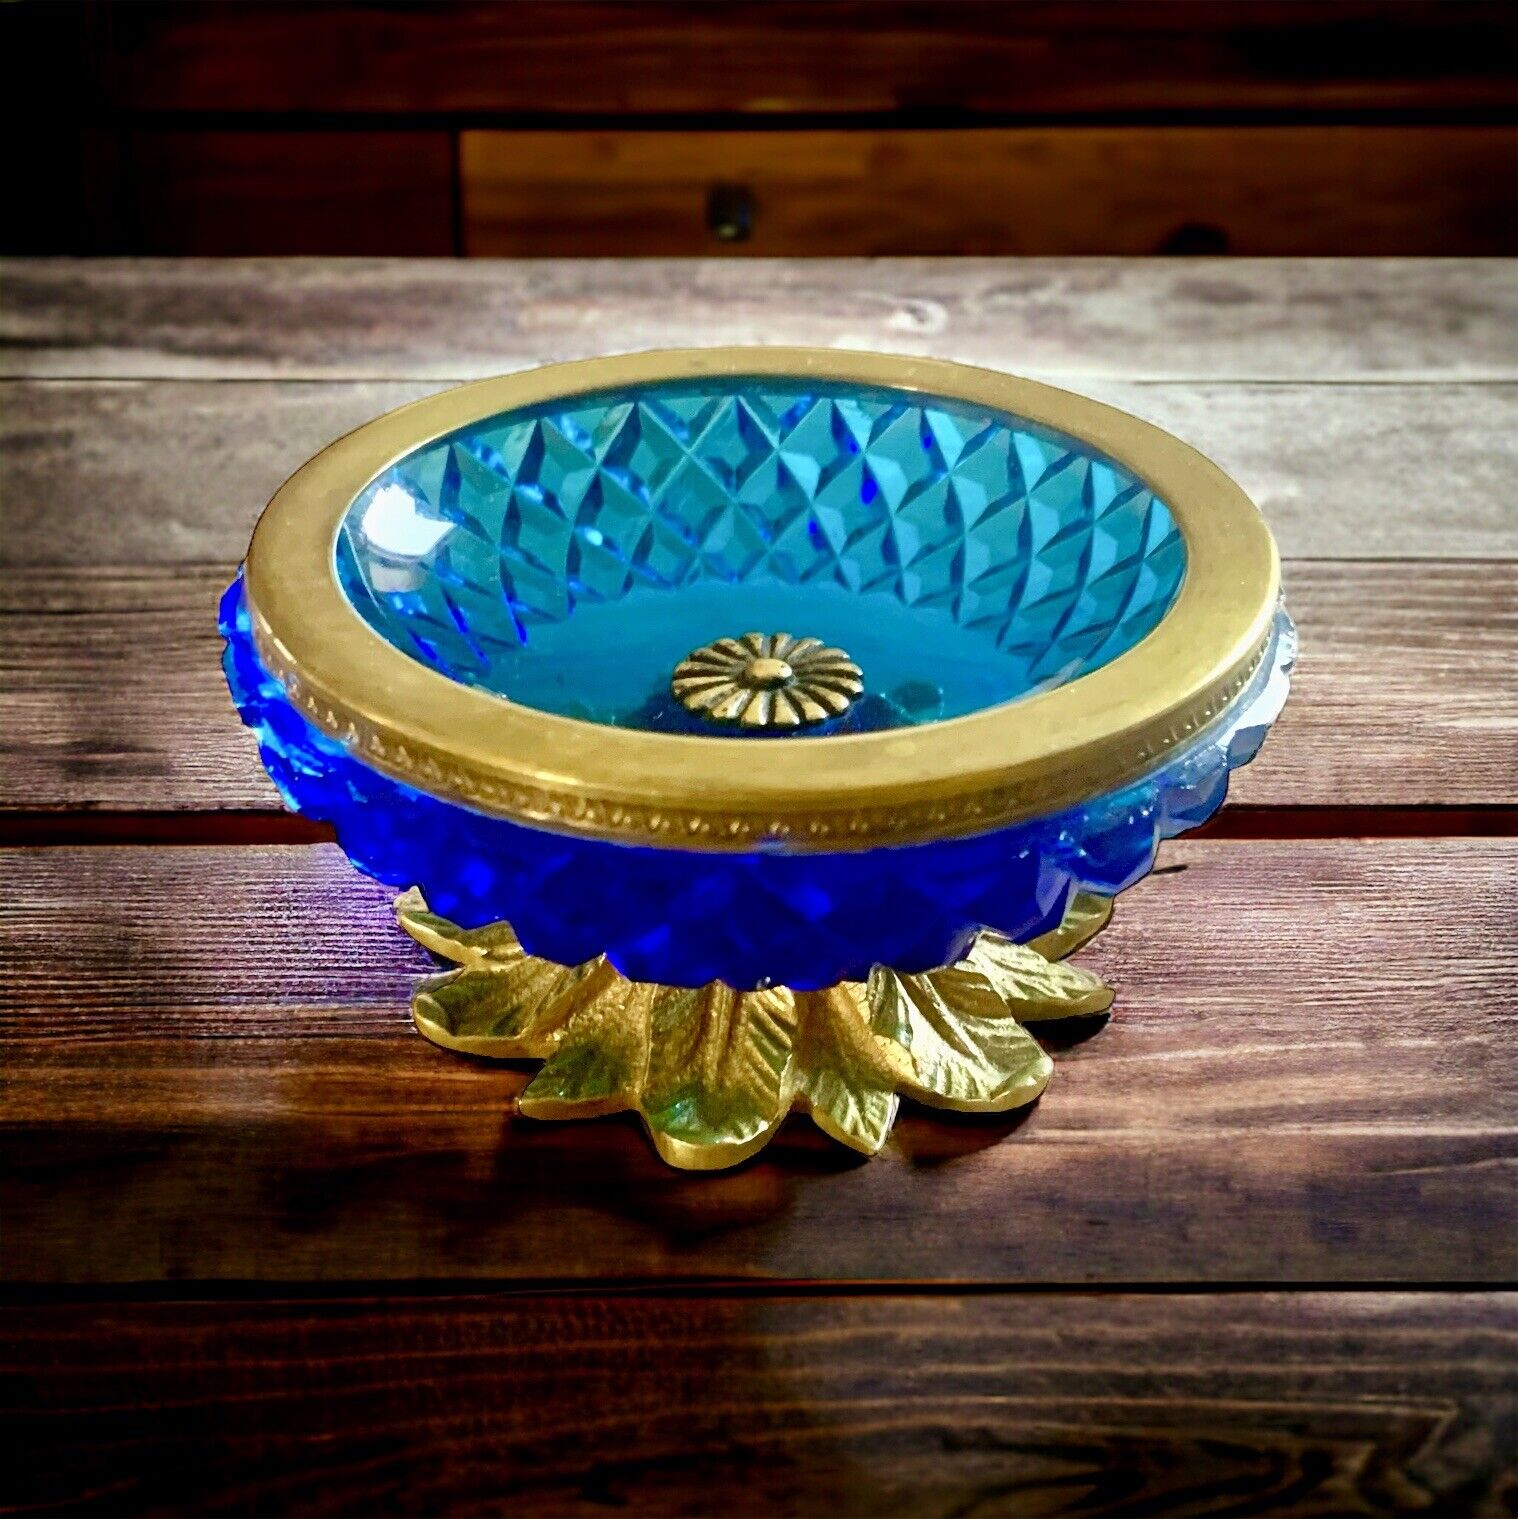 VTG Glass Diamond Point Cobalt Blue Iridescent Footed Glass Candy Dish Ashtray